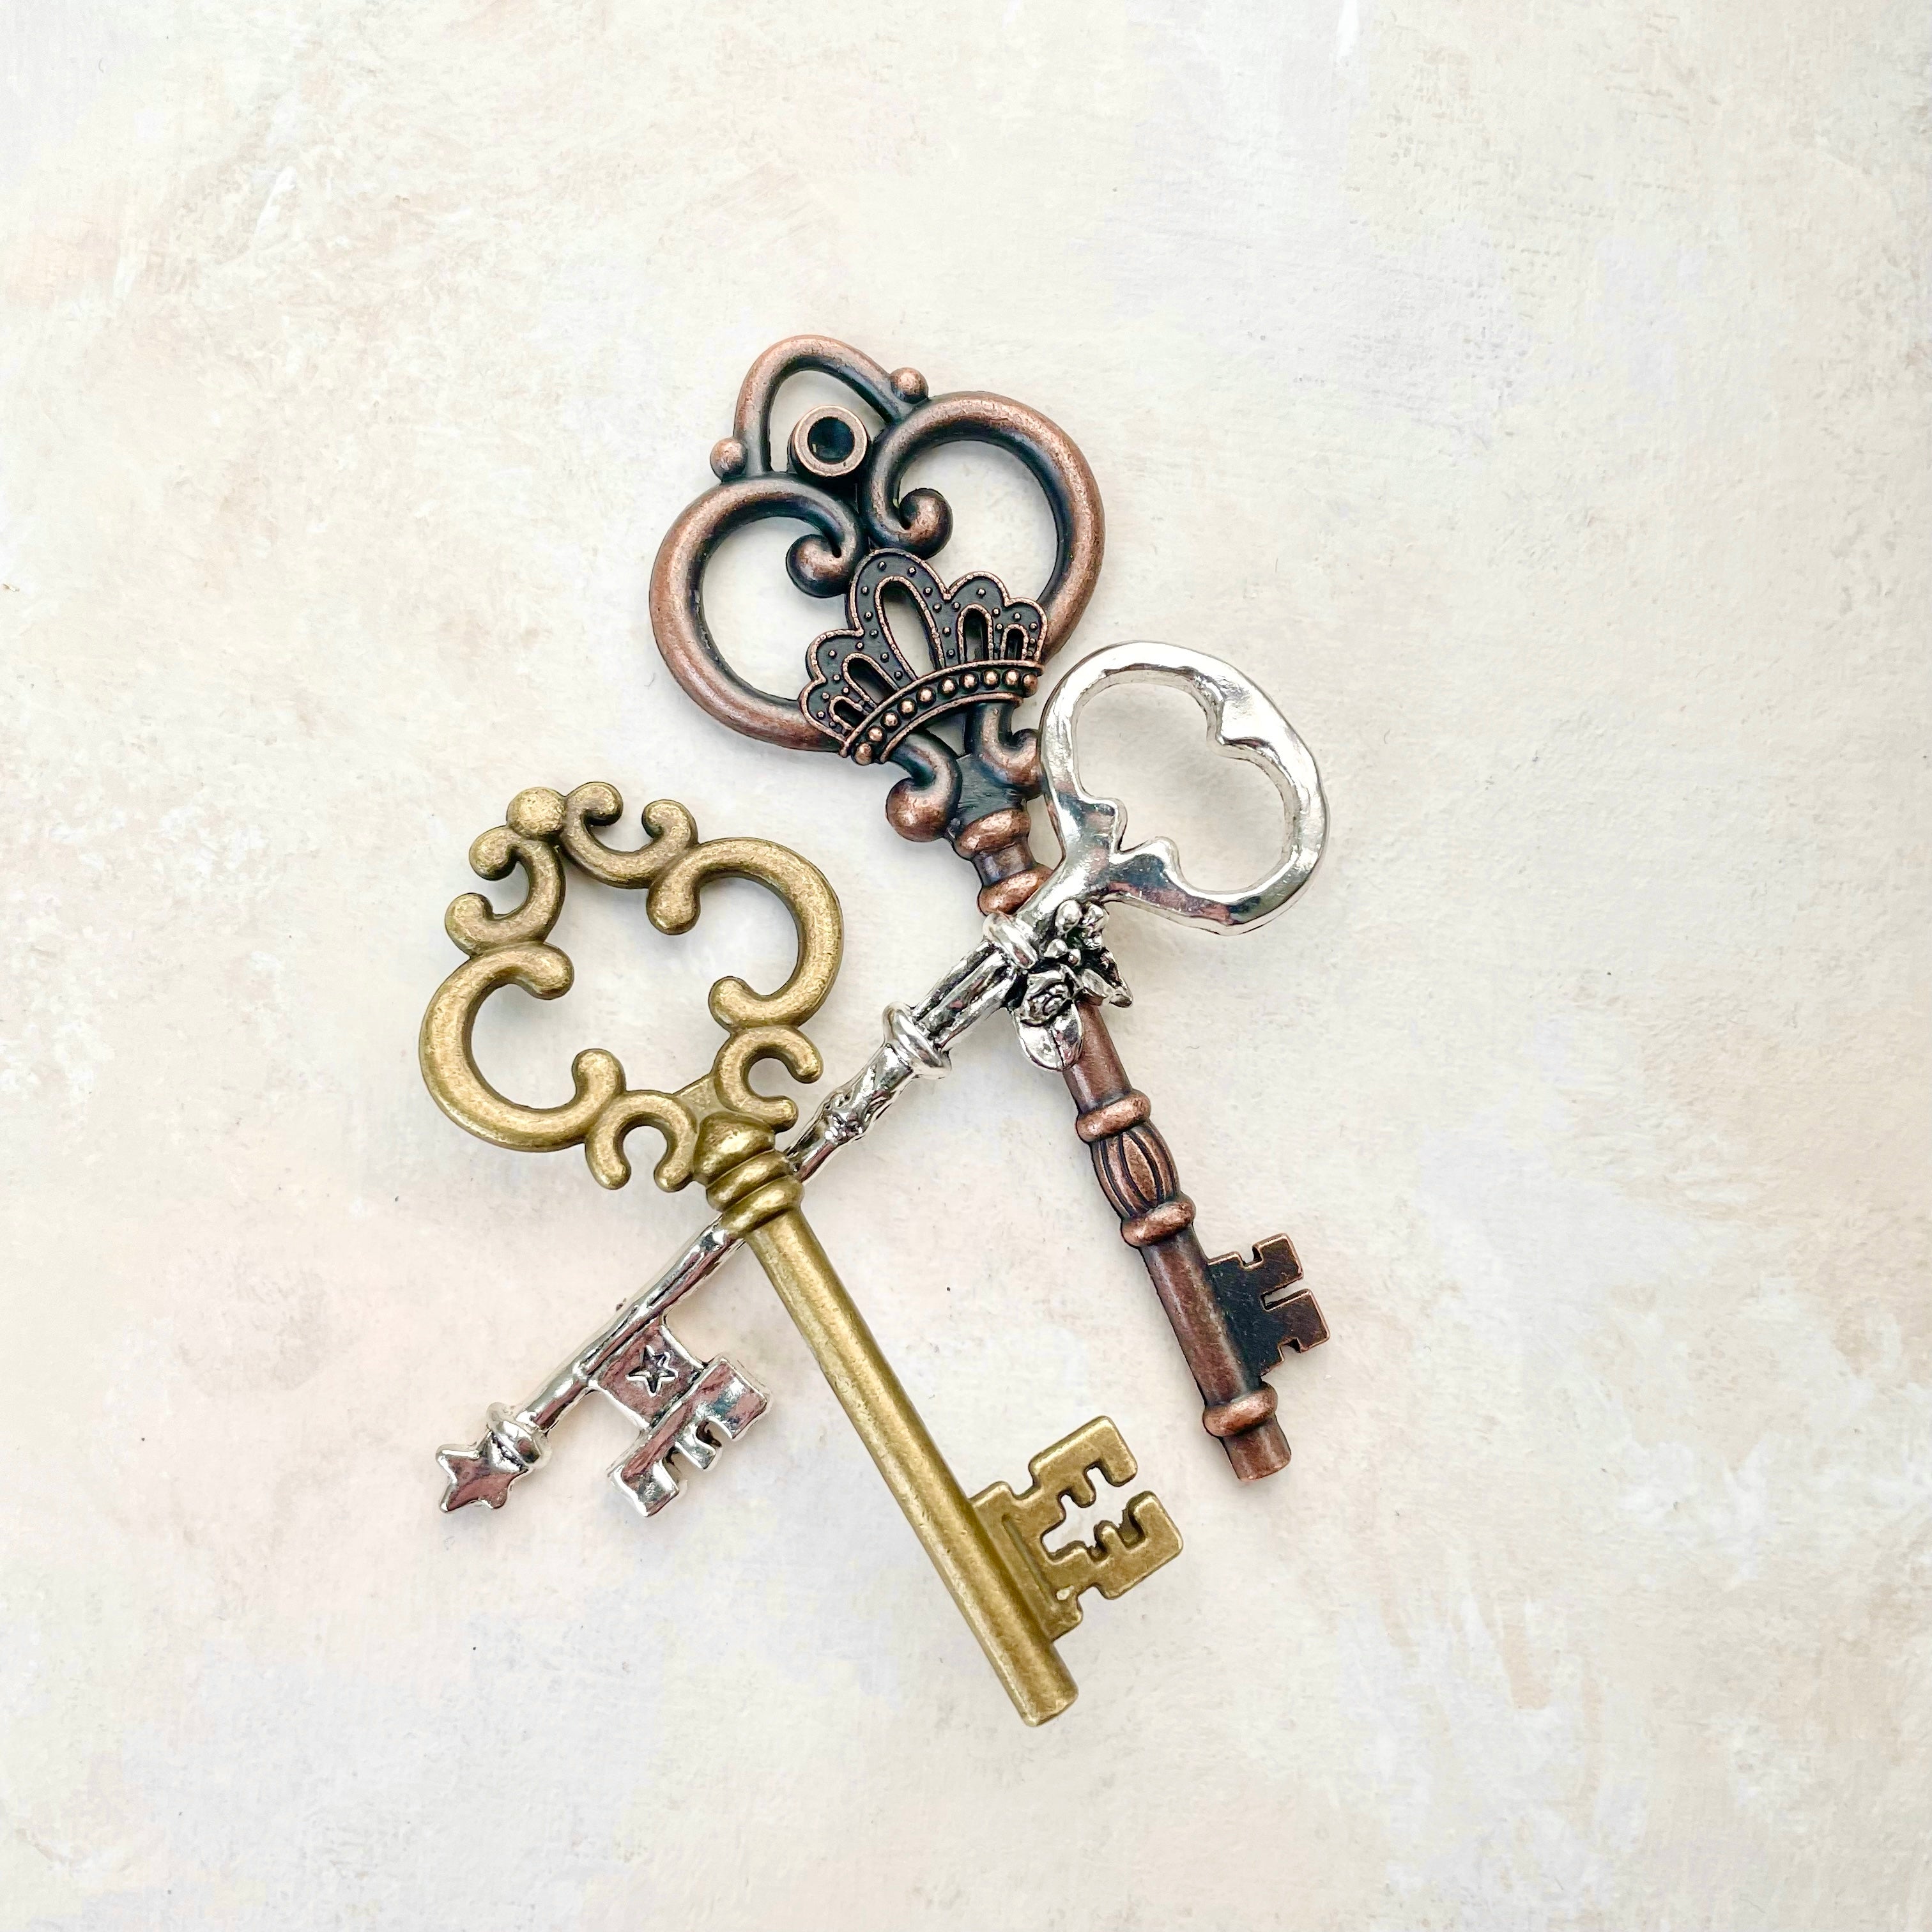 3 keys, gold, bronze and silver - must have Wedding Flat lay props from Champagne & GRIT